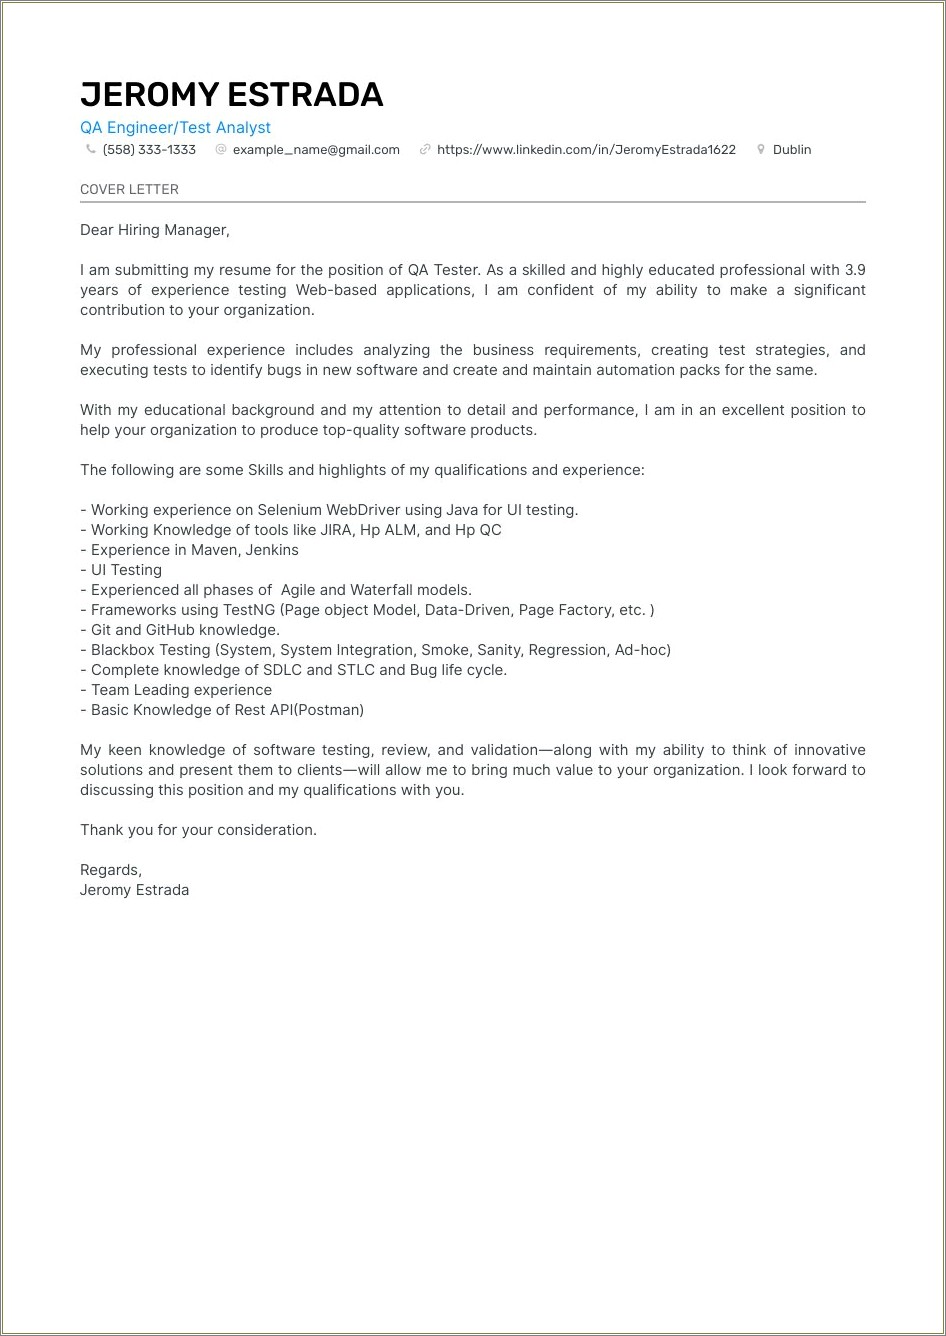 Sample Online Cover Letter With Resume